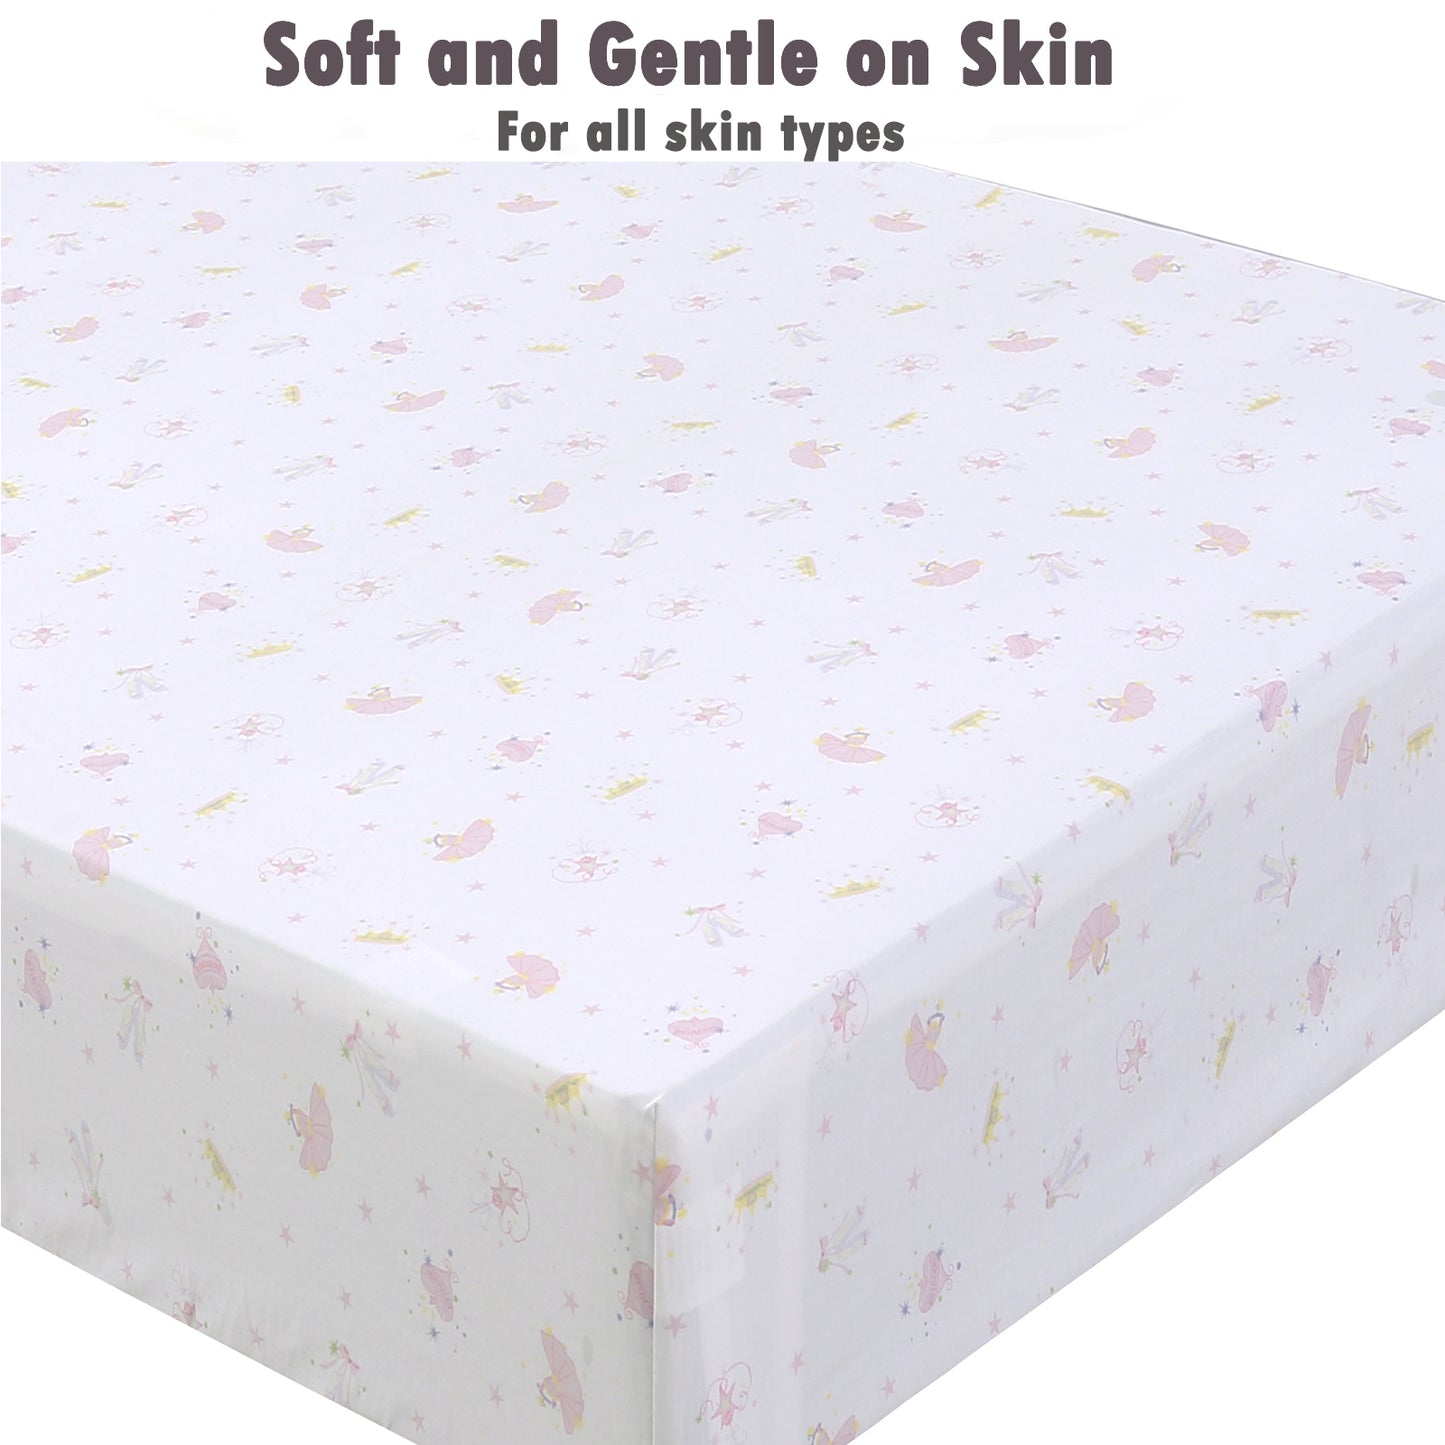 3 Piece Crib/Toddler Cotton Fitted Sheets Pink Purple Polka Dot Butterfly Floral Princess